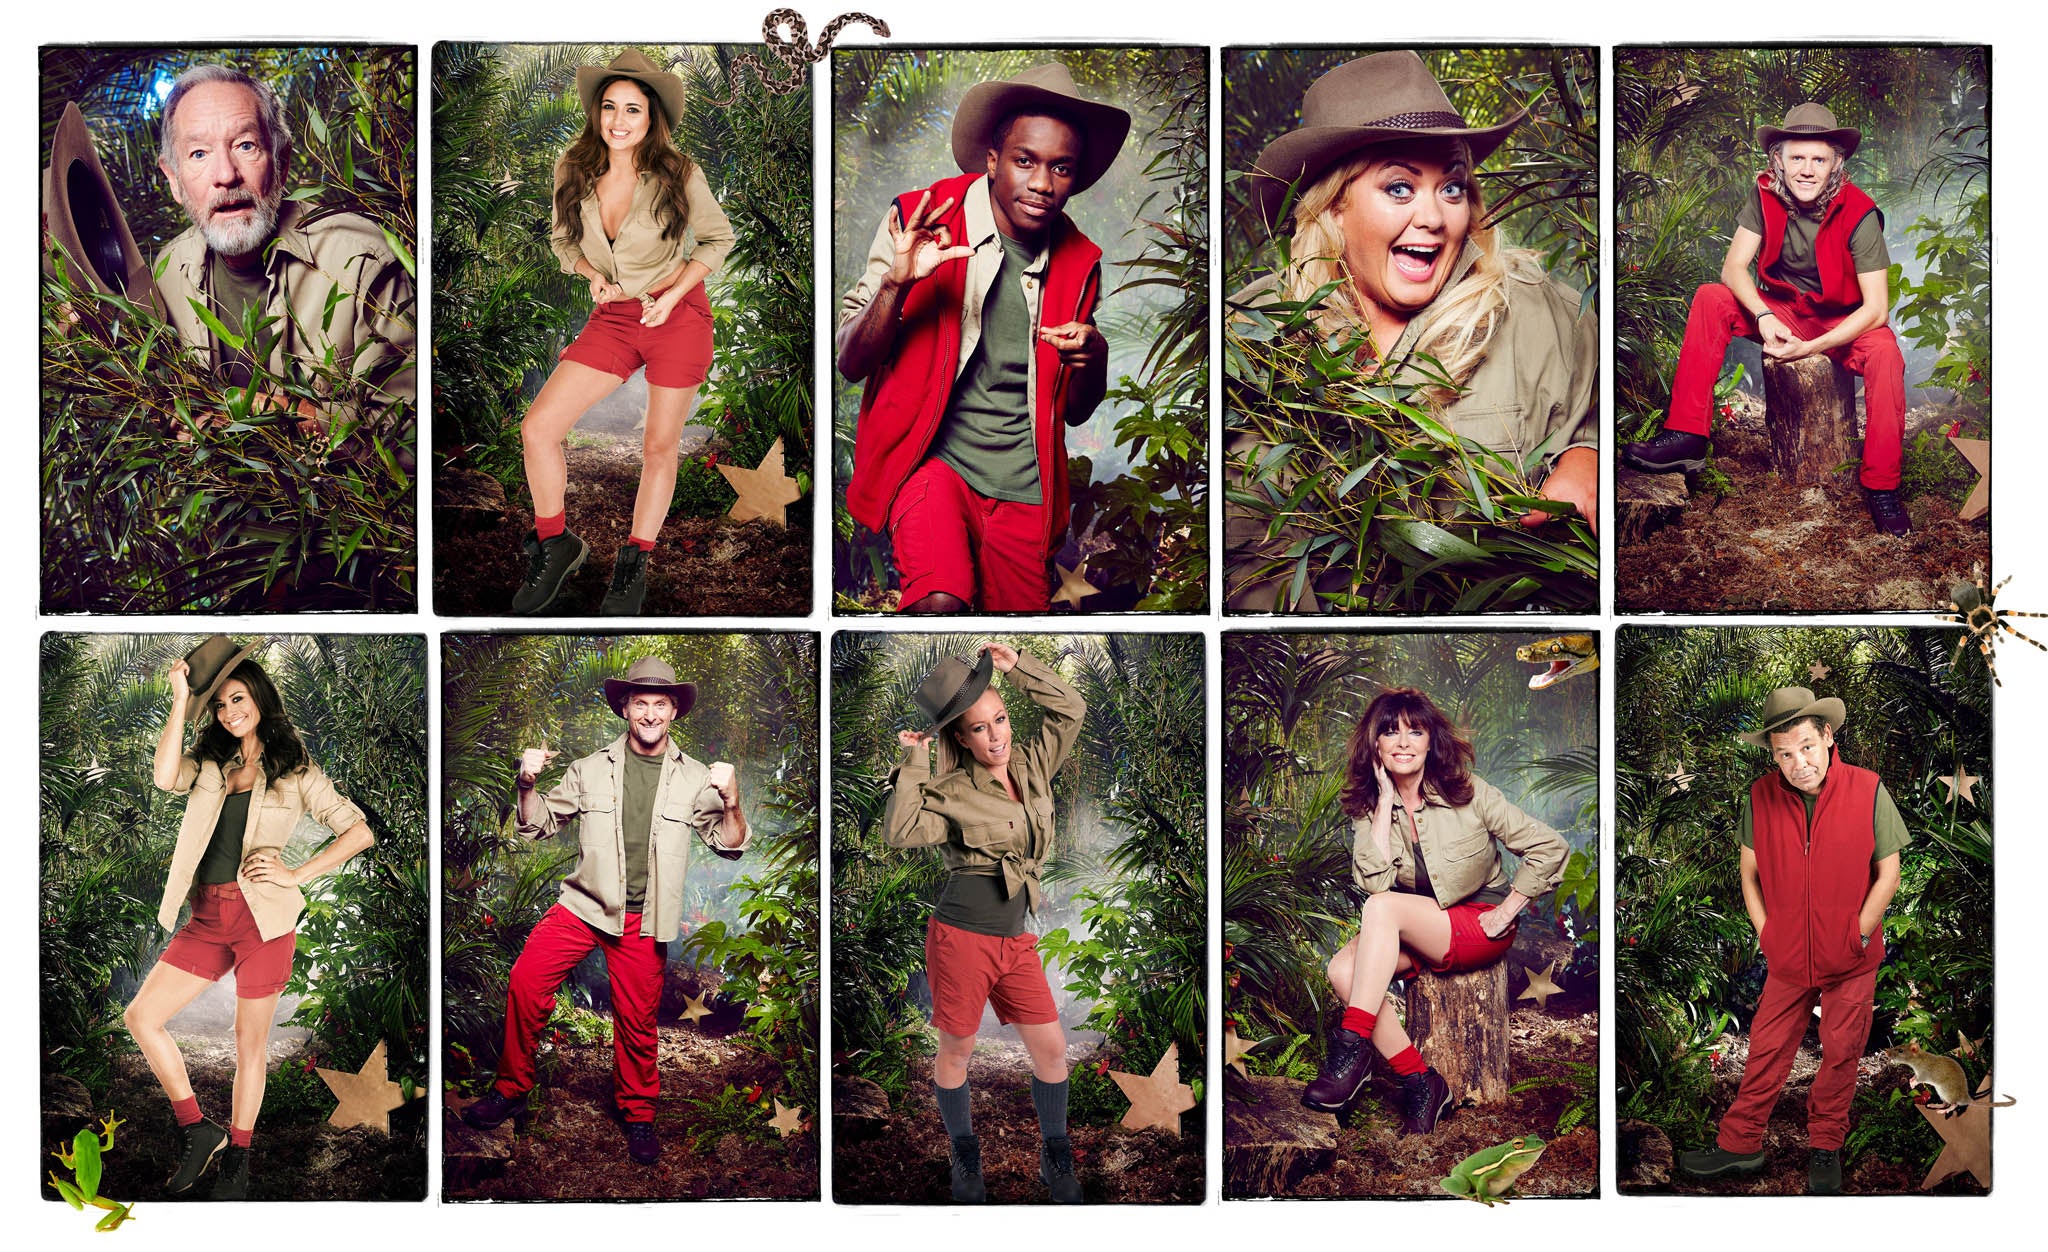 This year's I'm A Celebrity contestants